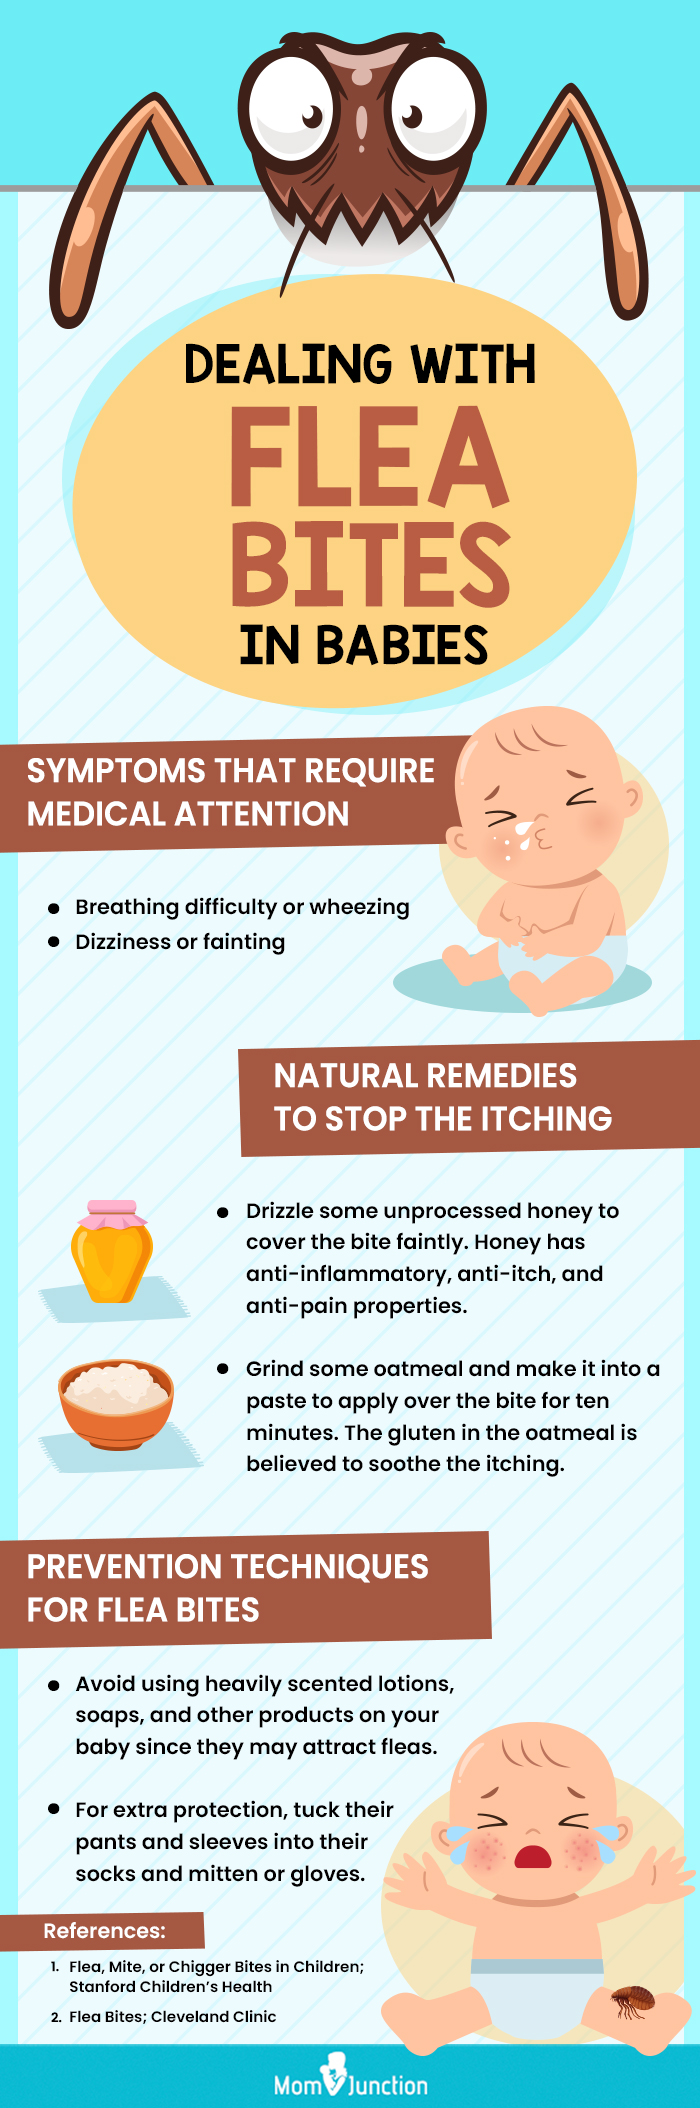 tips to deal with flea bites in babies (infographic)